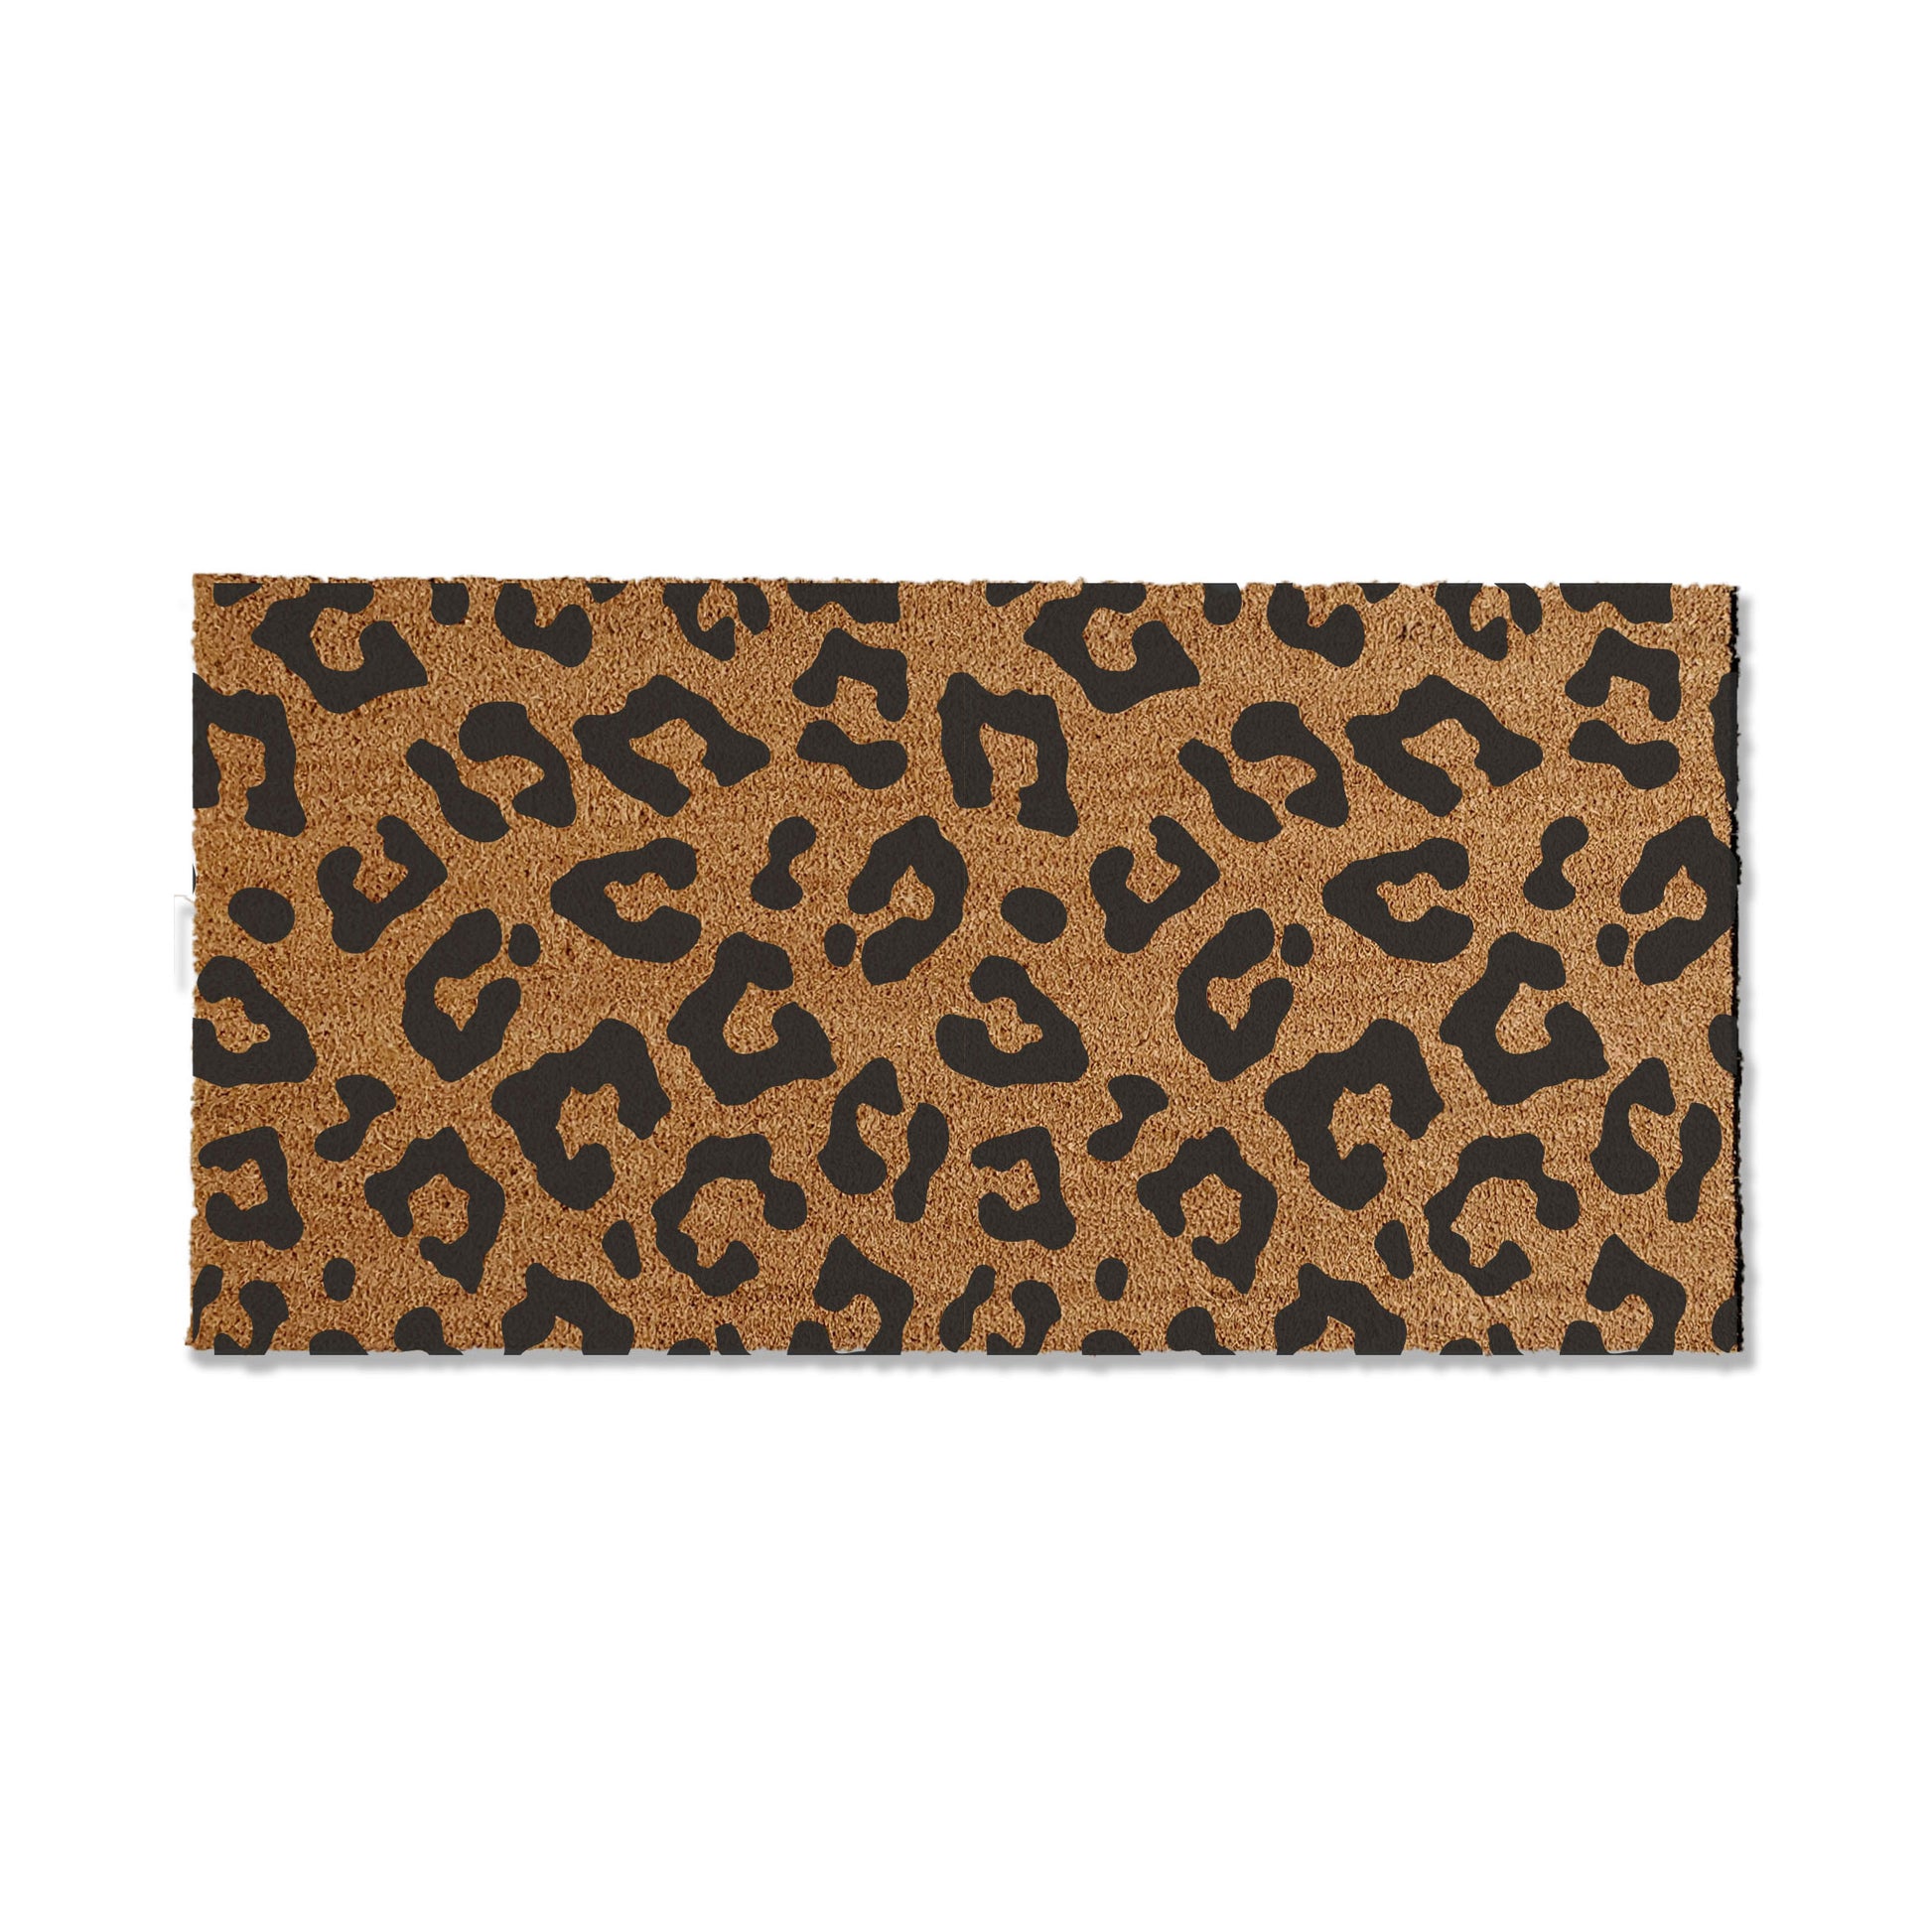 Make a stylish statement with our coir doormat showcasing an all-over leopard print pattern. Perfect for animal print lovers, this trendy design is highly popular. Available in multiple sizes, the mat not only adds a fashionable touch to your doorstep but is also effective at trapping dirt.